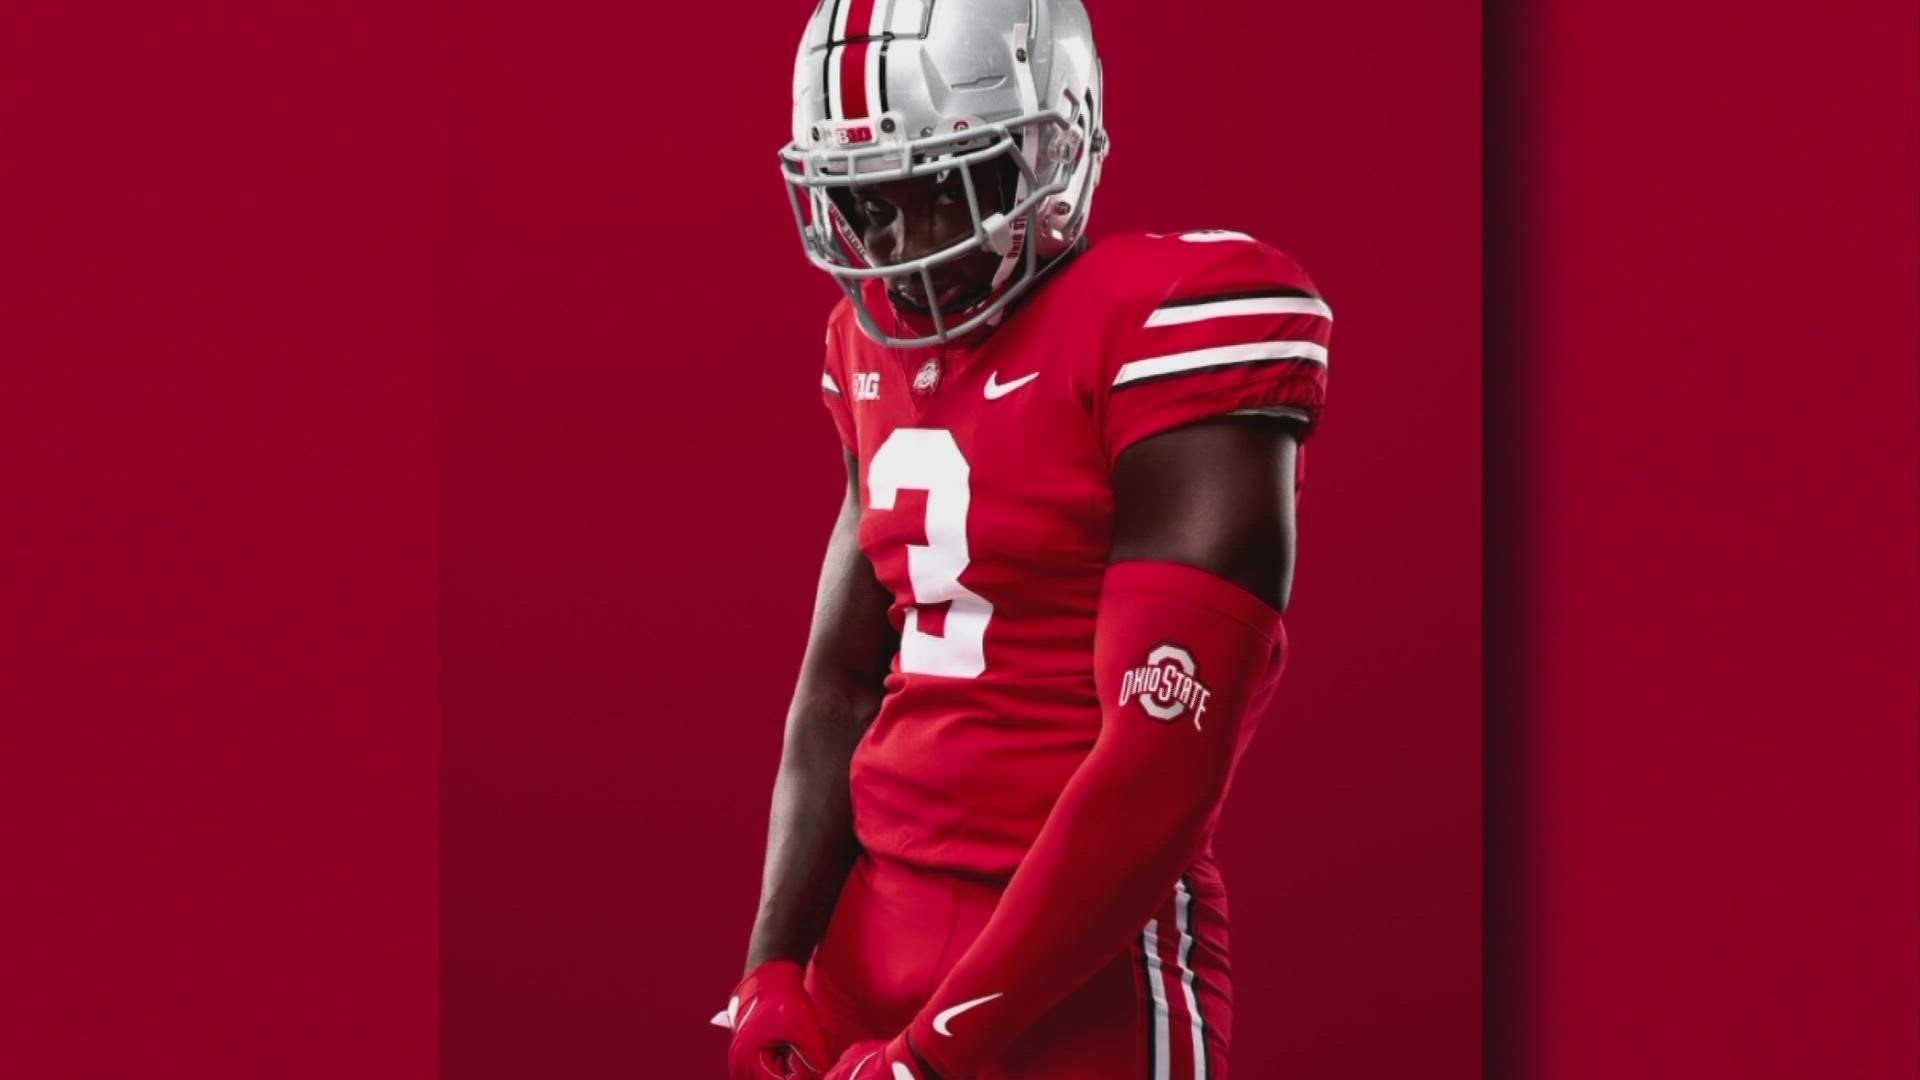 The color scheme will be a first among the Buckeyes' alternate uniforms.